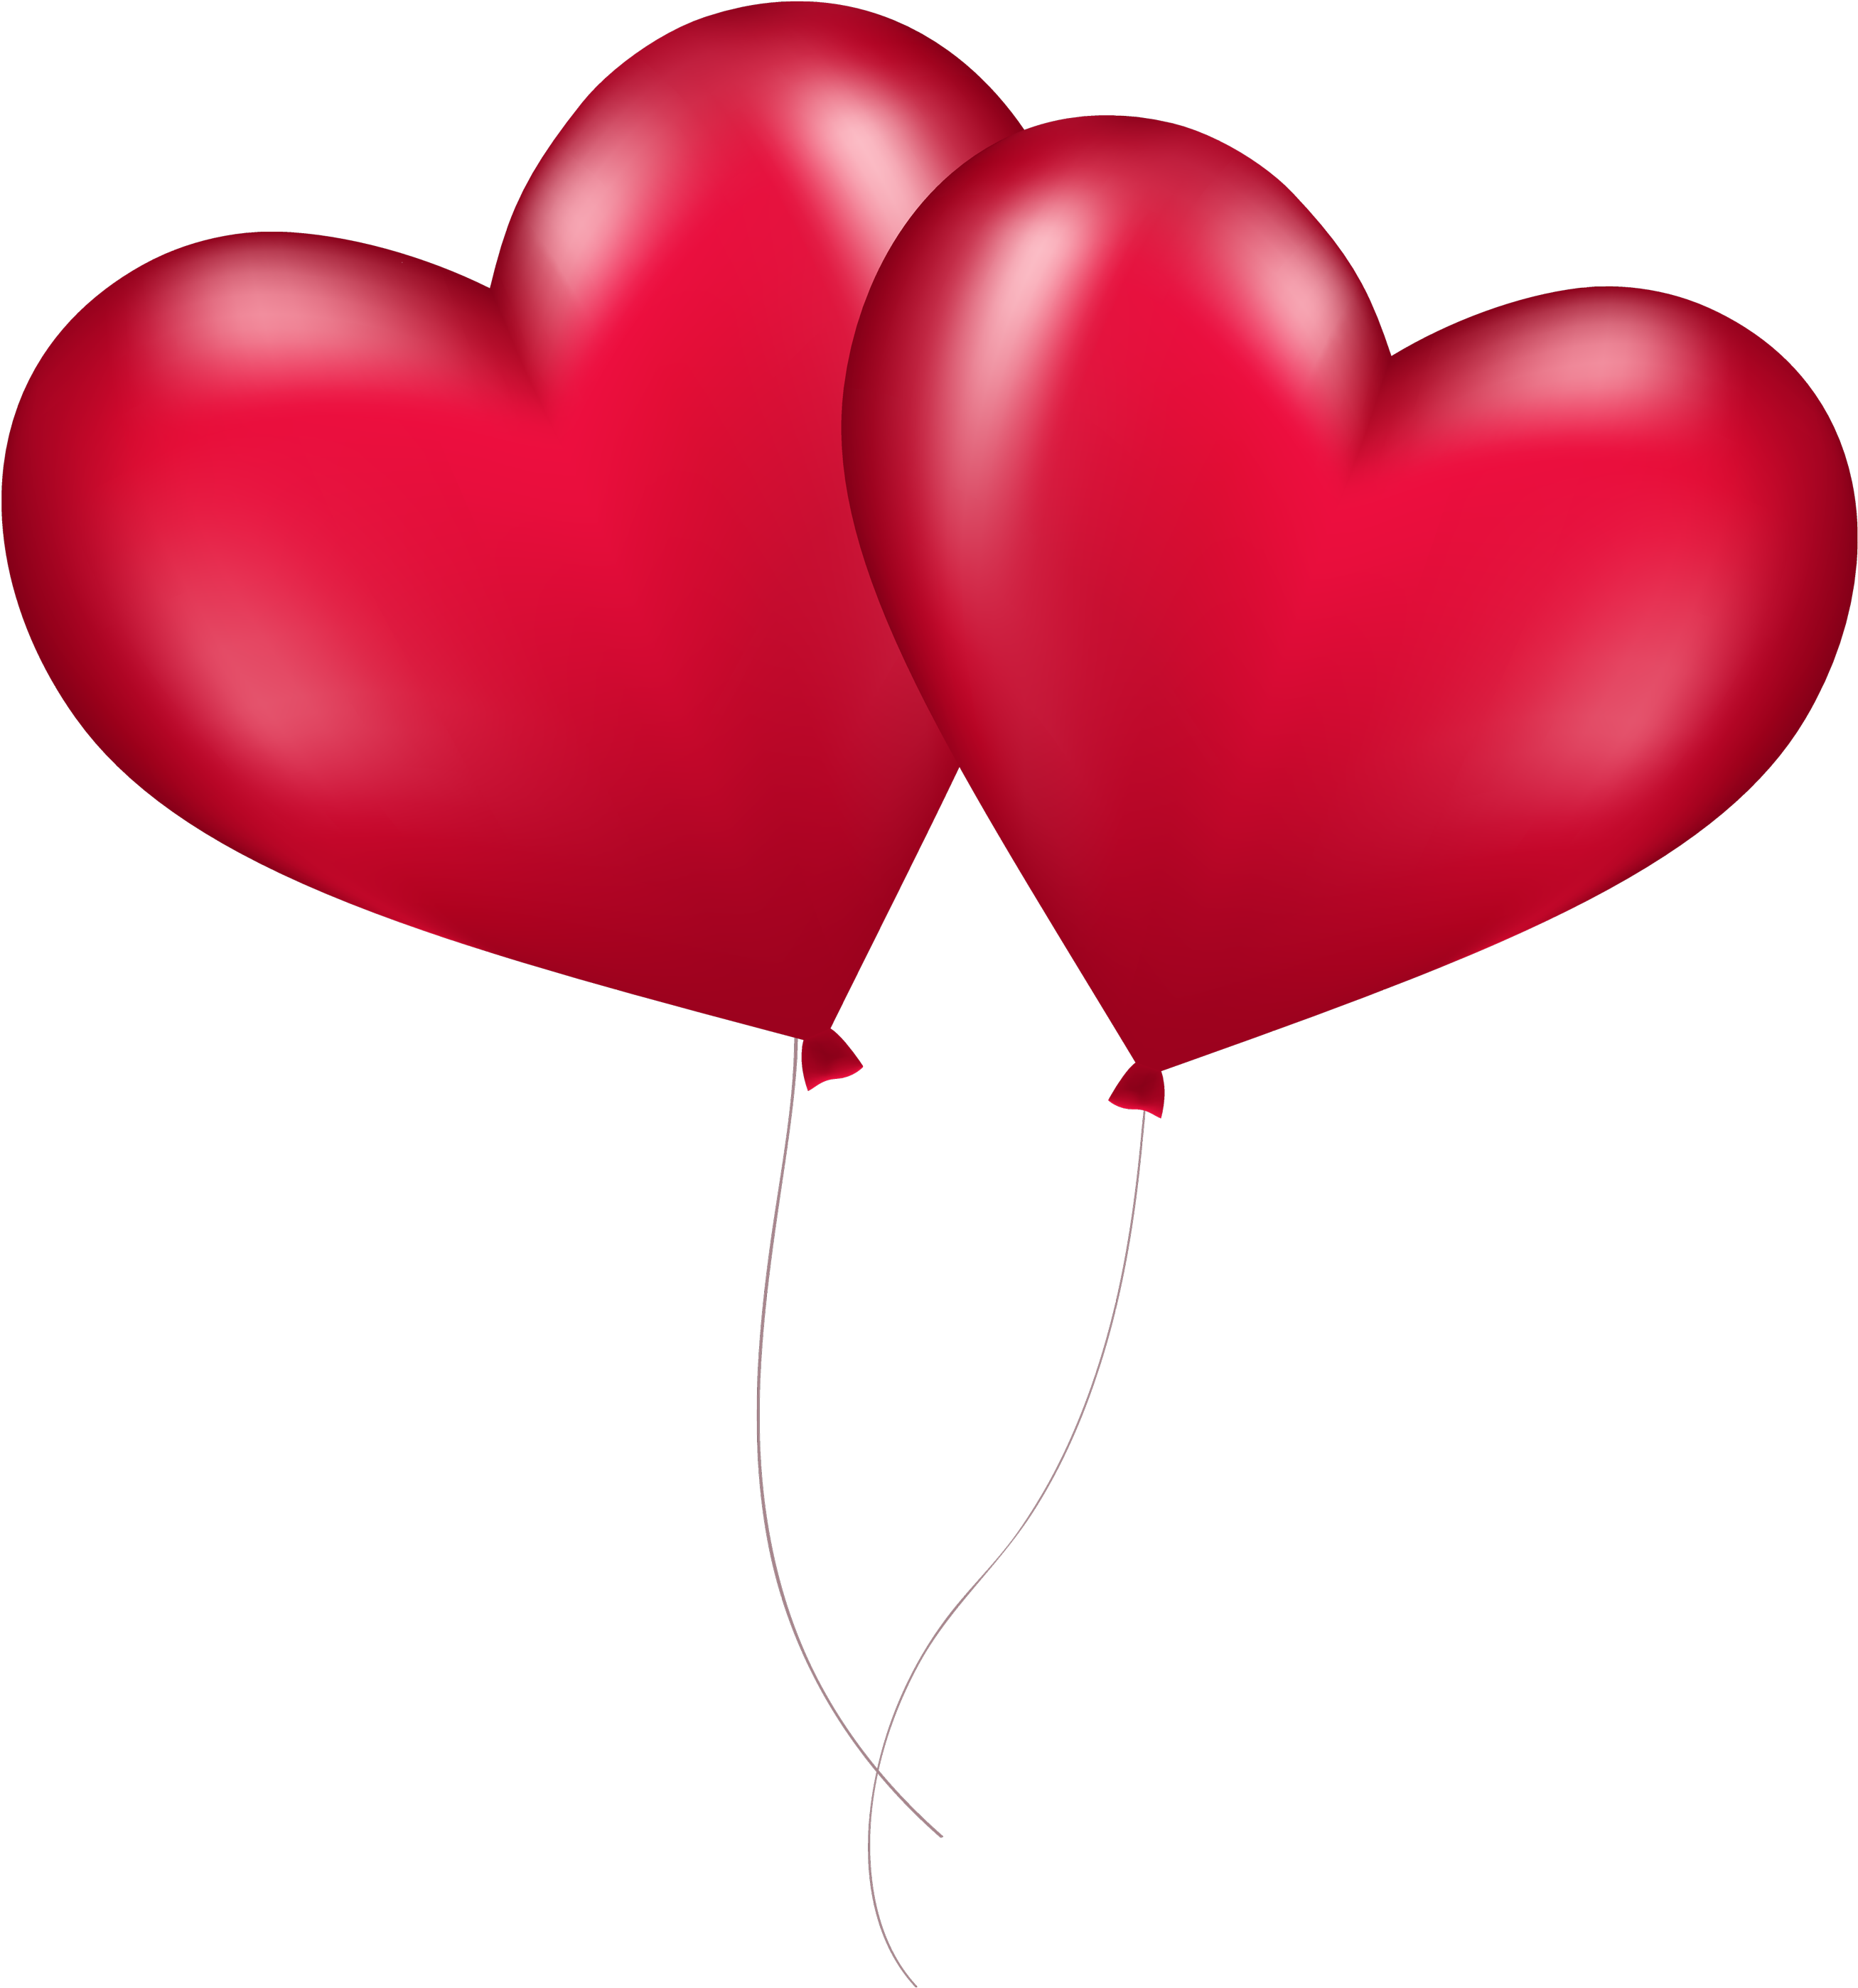 Heart Balloons Png Image - Heart Balloons Png (3000x3000)